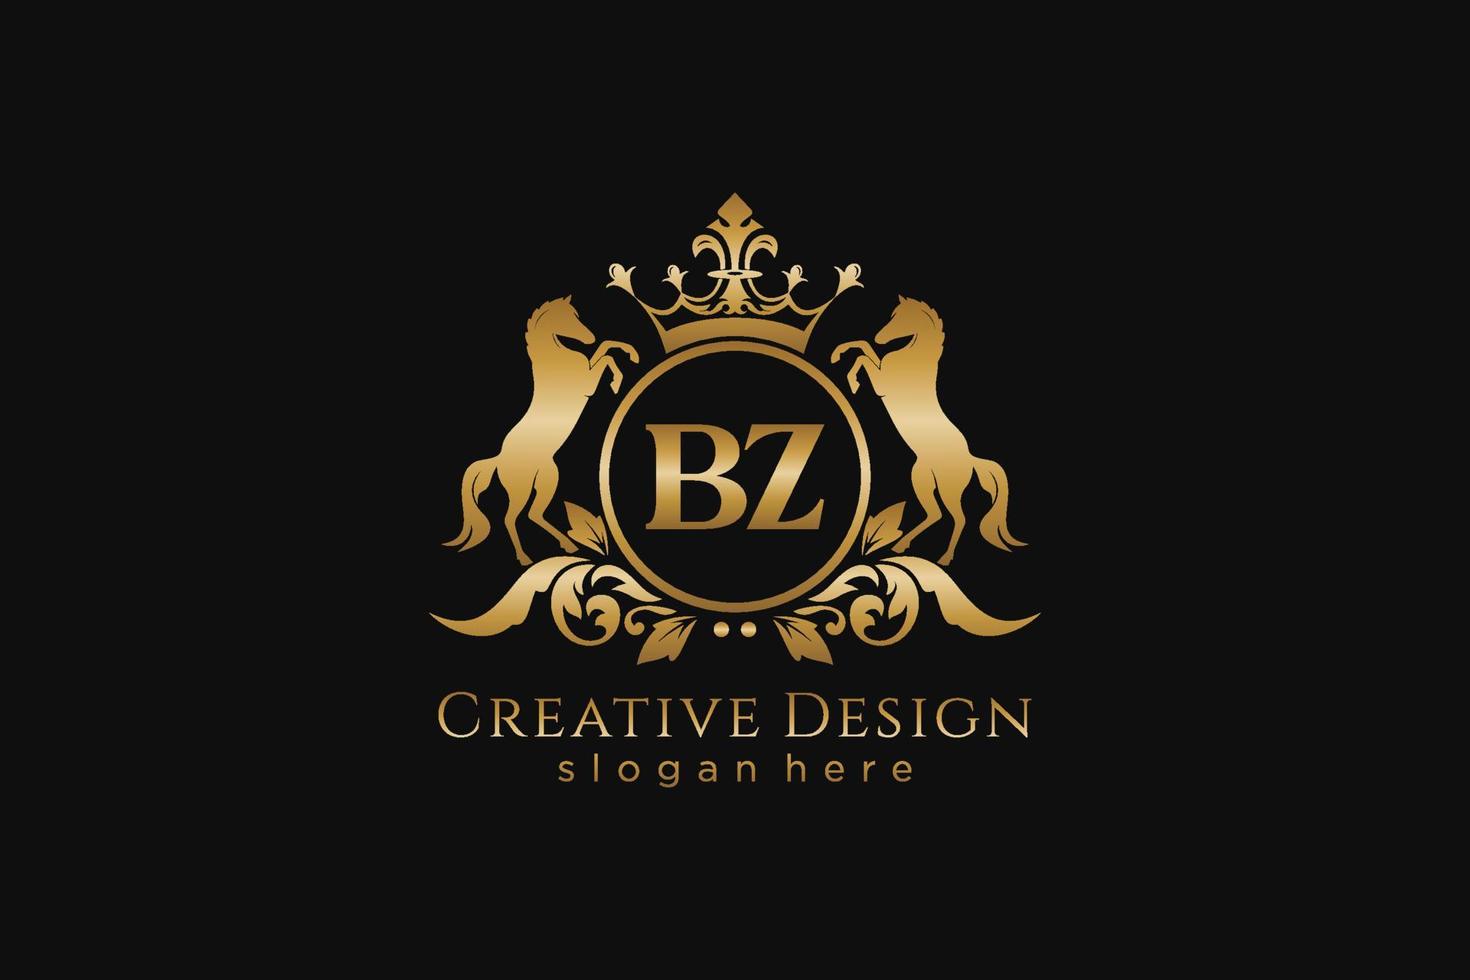 initial BZ Retro golden crest with circle and two horses, badge template with scrolls and royal crown - perfect for luxurious branding projects vector